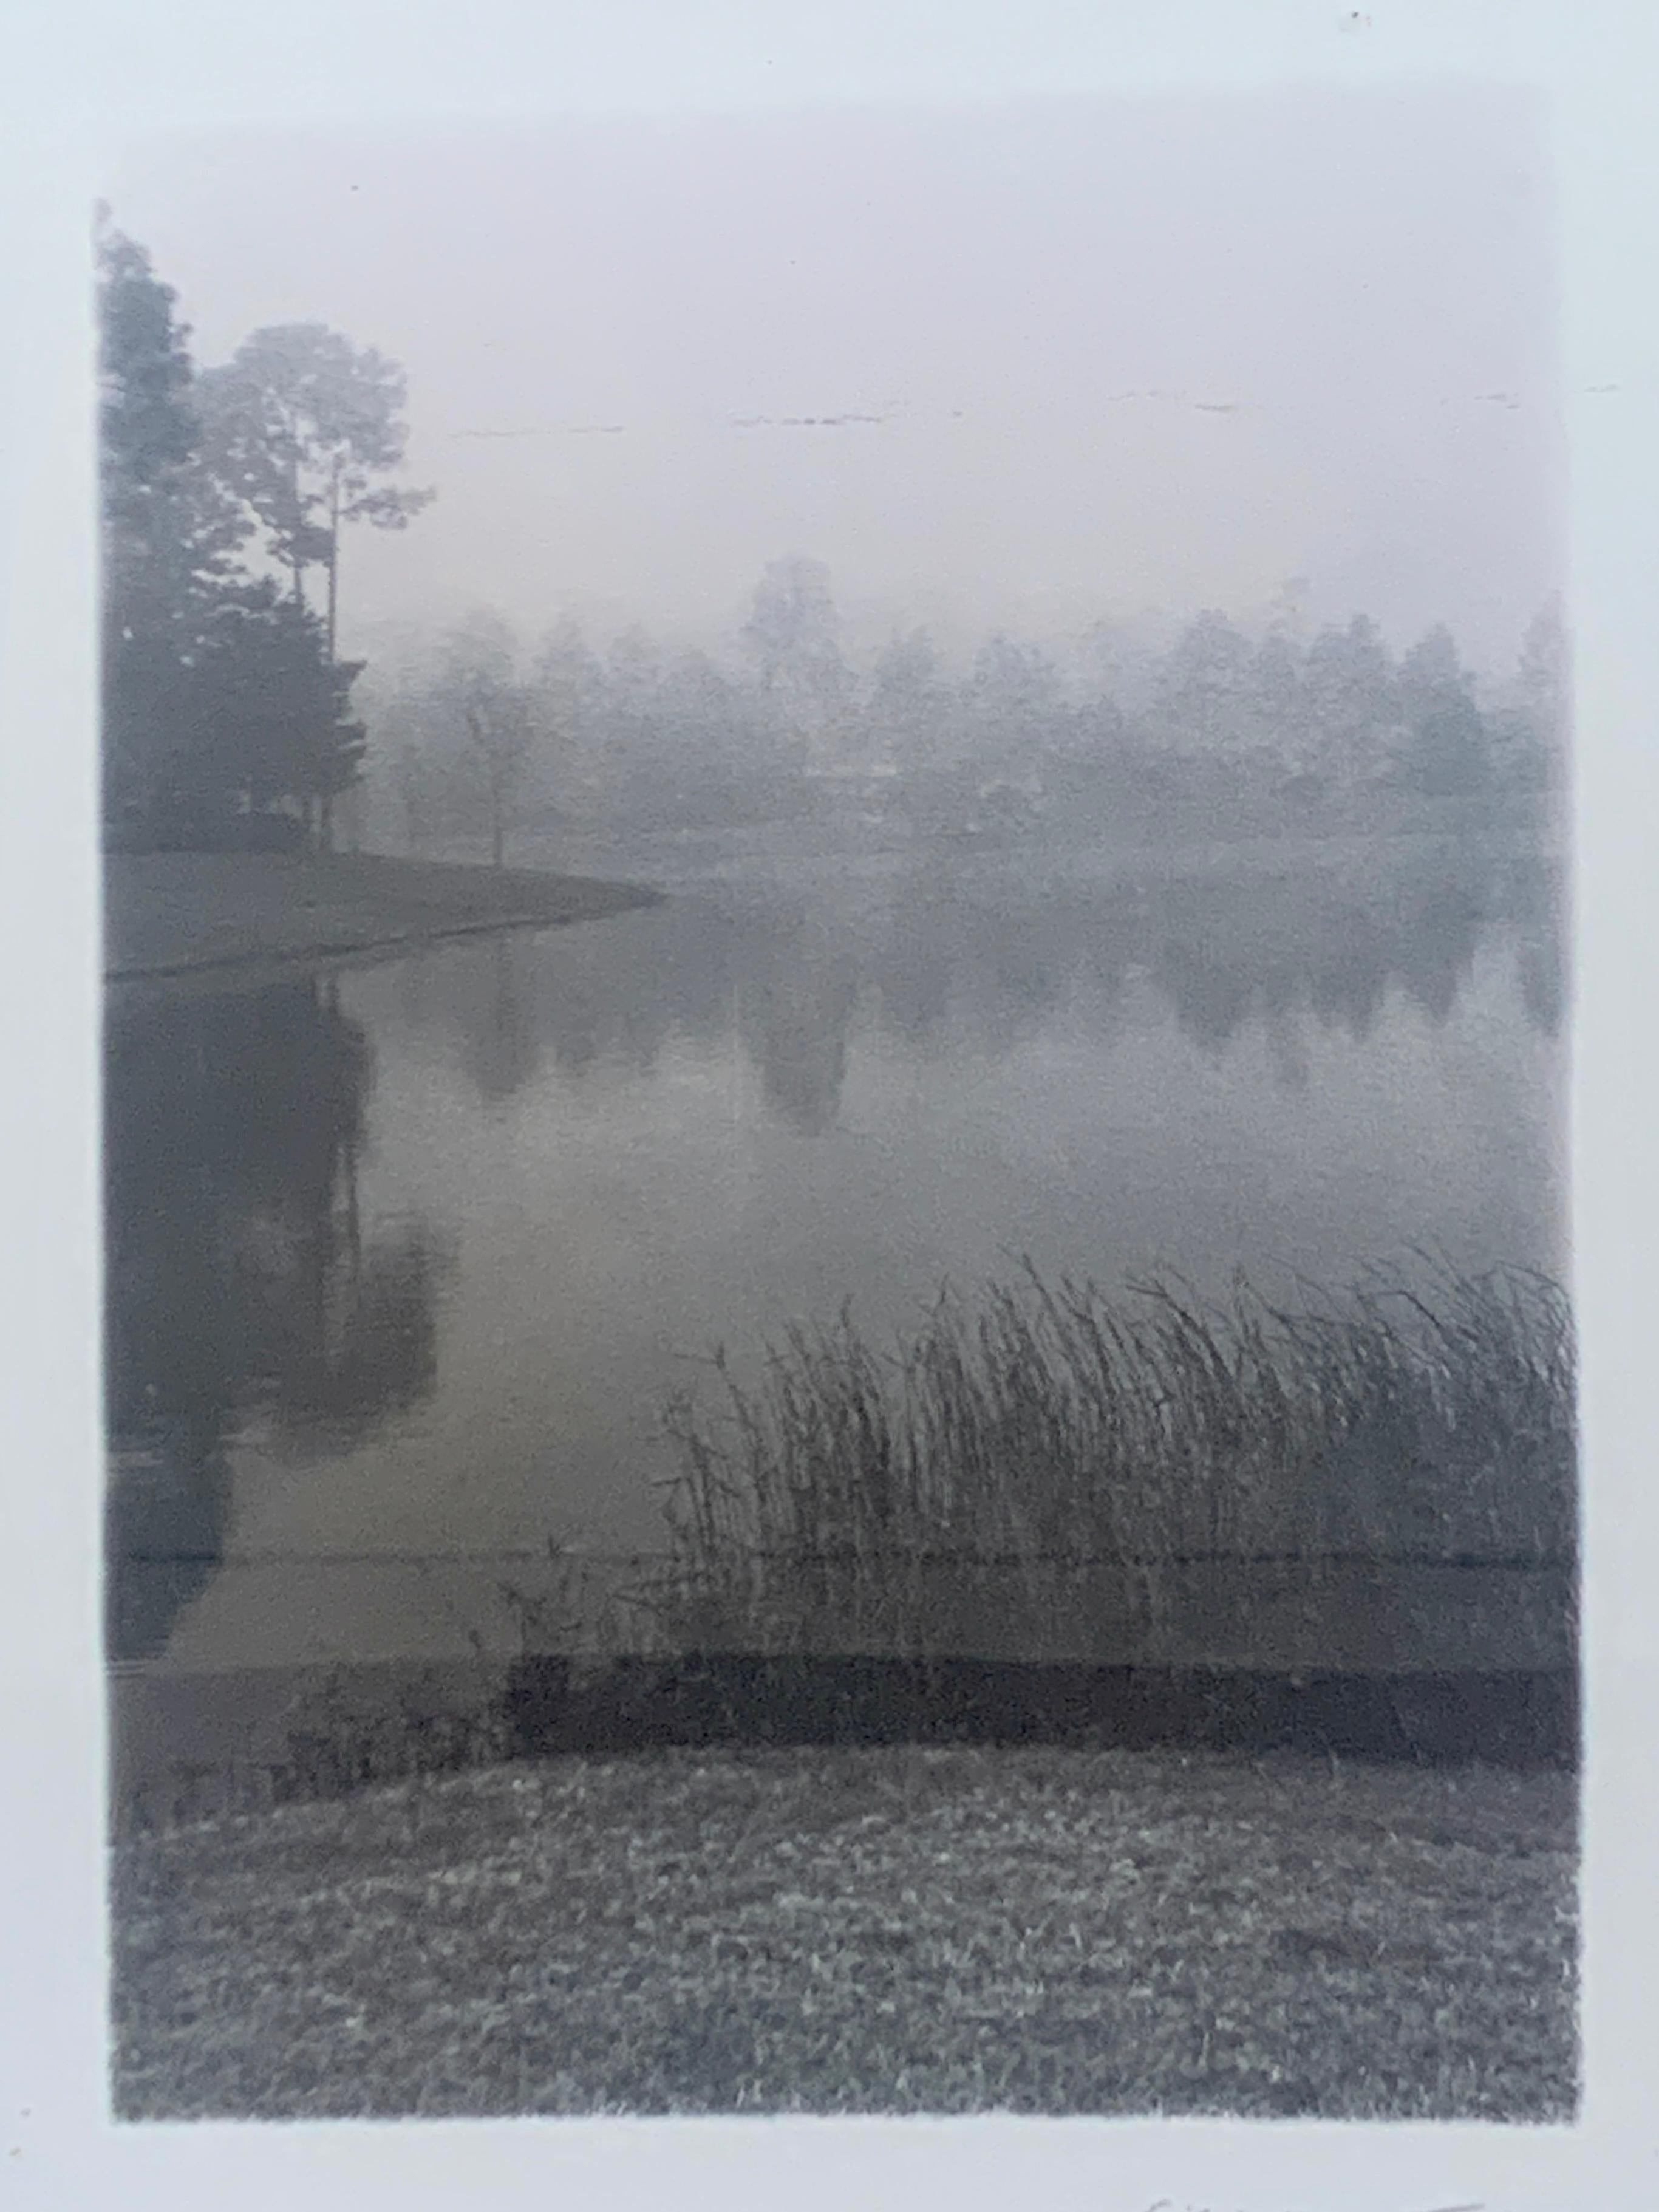 A gorgeous framed print from a photograph taken by artist Christine Triebert of a foggy landscape. This etherial and haunting landscape draws you in, and would compliment any interior.

USA, Circa 1990s

Measures: 13.5